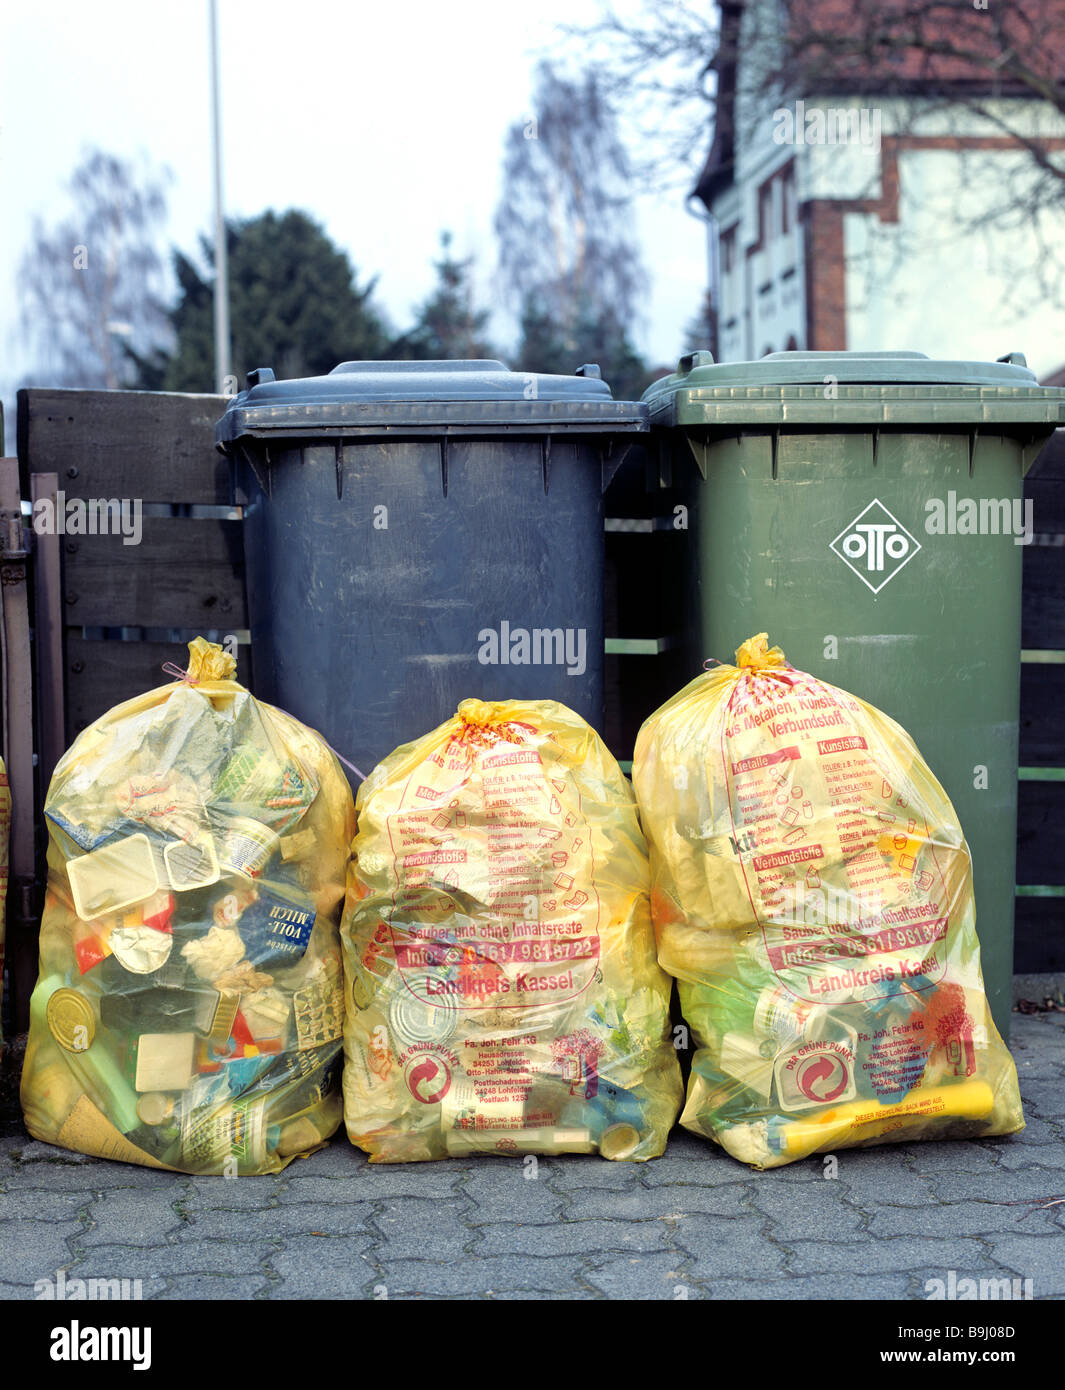 Recycling, yellow bags, bins, Germany Stock Photo